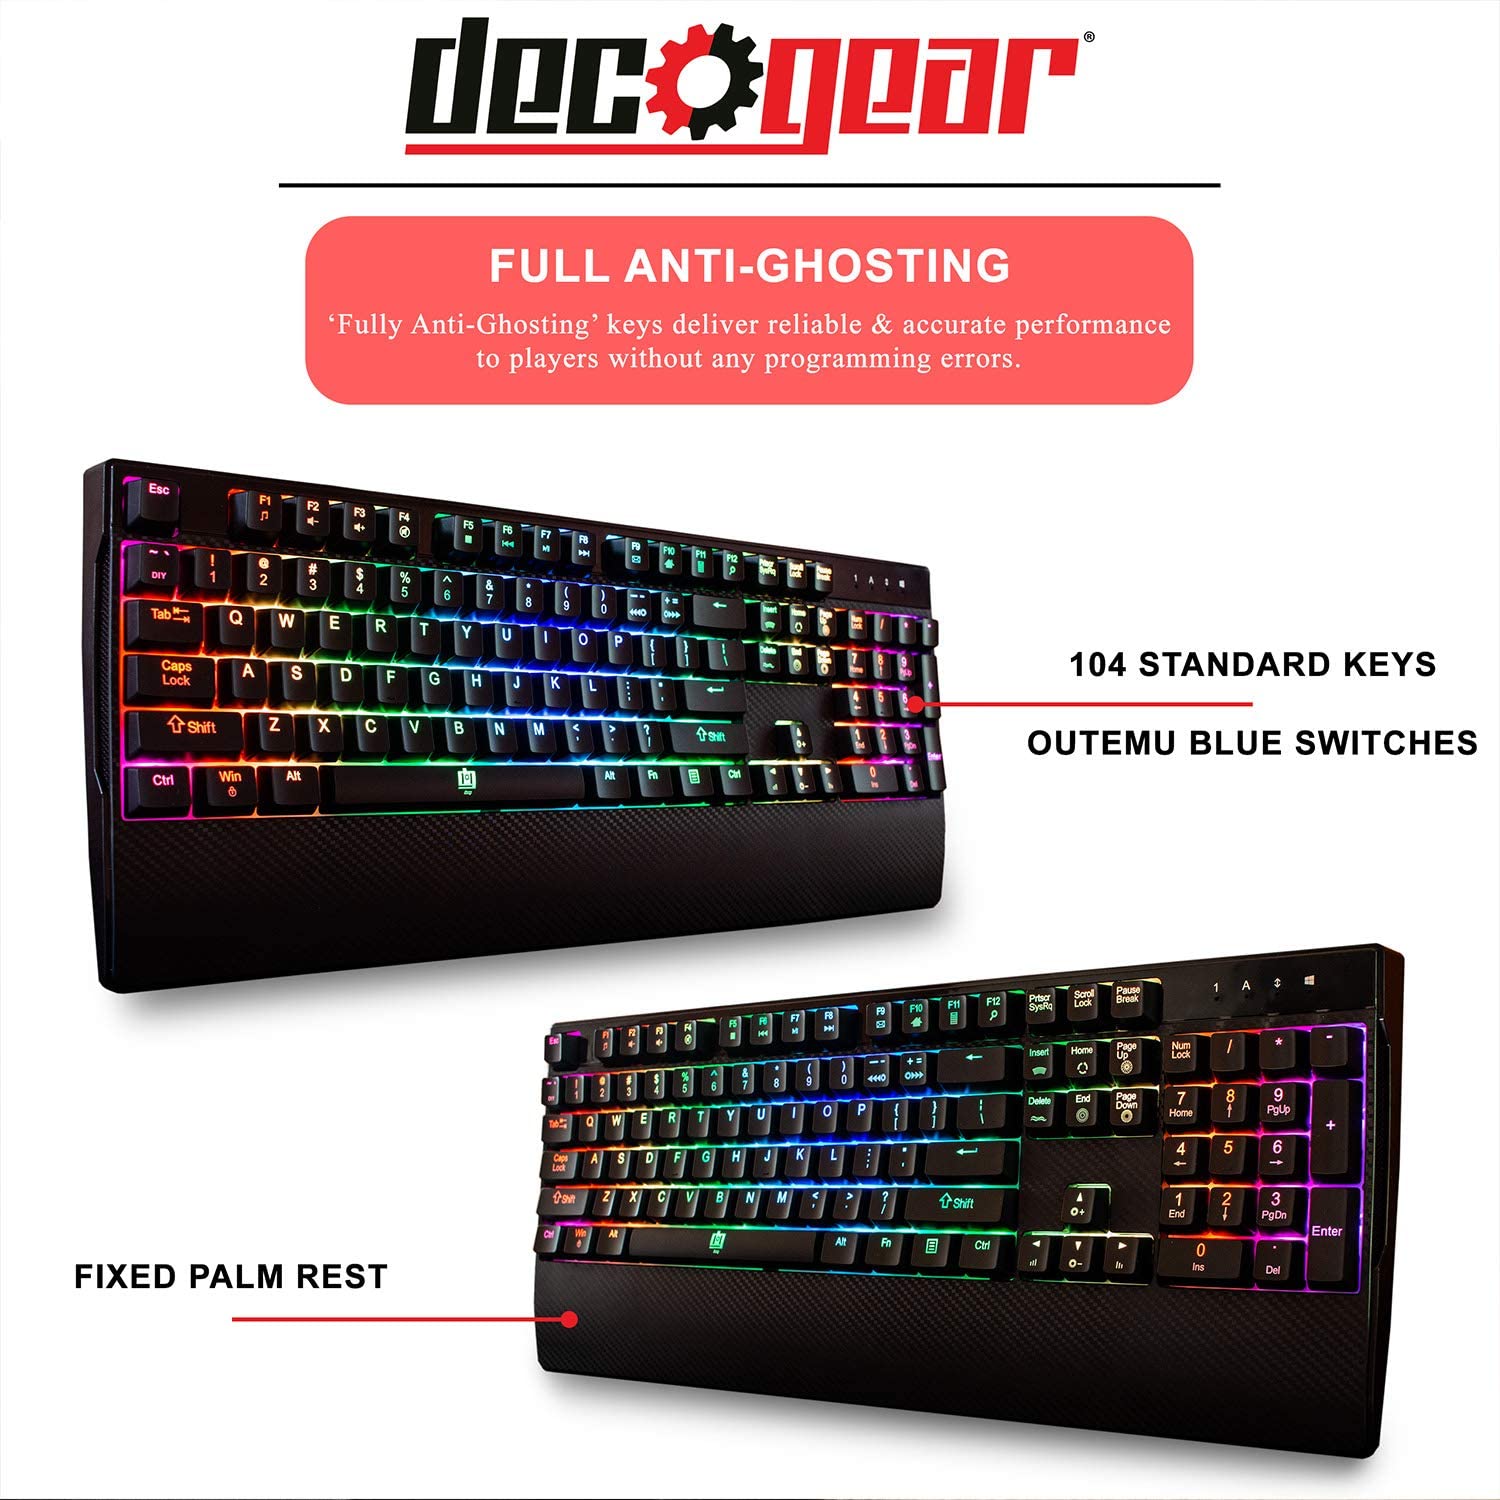 Deco Gear Mechanical Gaming Keyboard, Anti-Ghosting, Ergonomic Fixed Palm Rest, Full Customizable RGB Backlit, Carbon Fiber Design, Outemu Blue Switch, Wired, Black $25